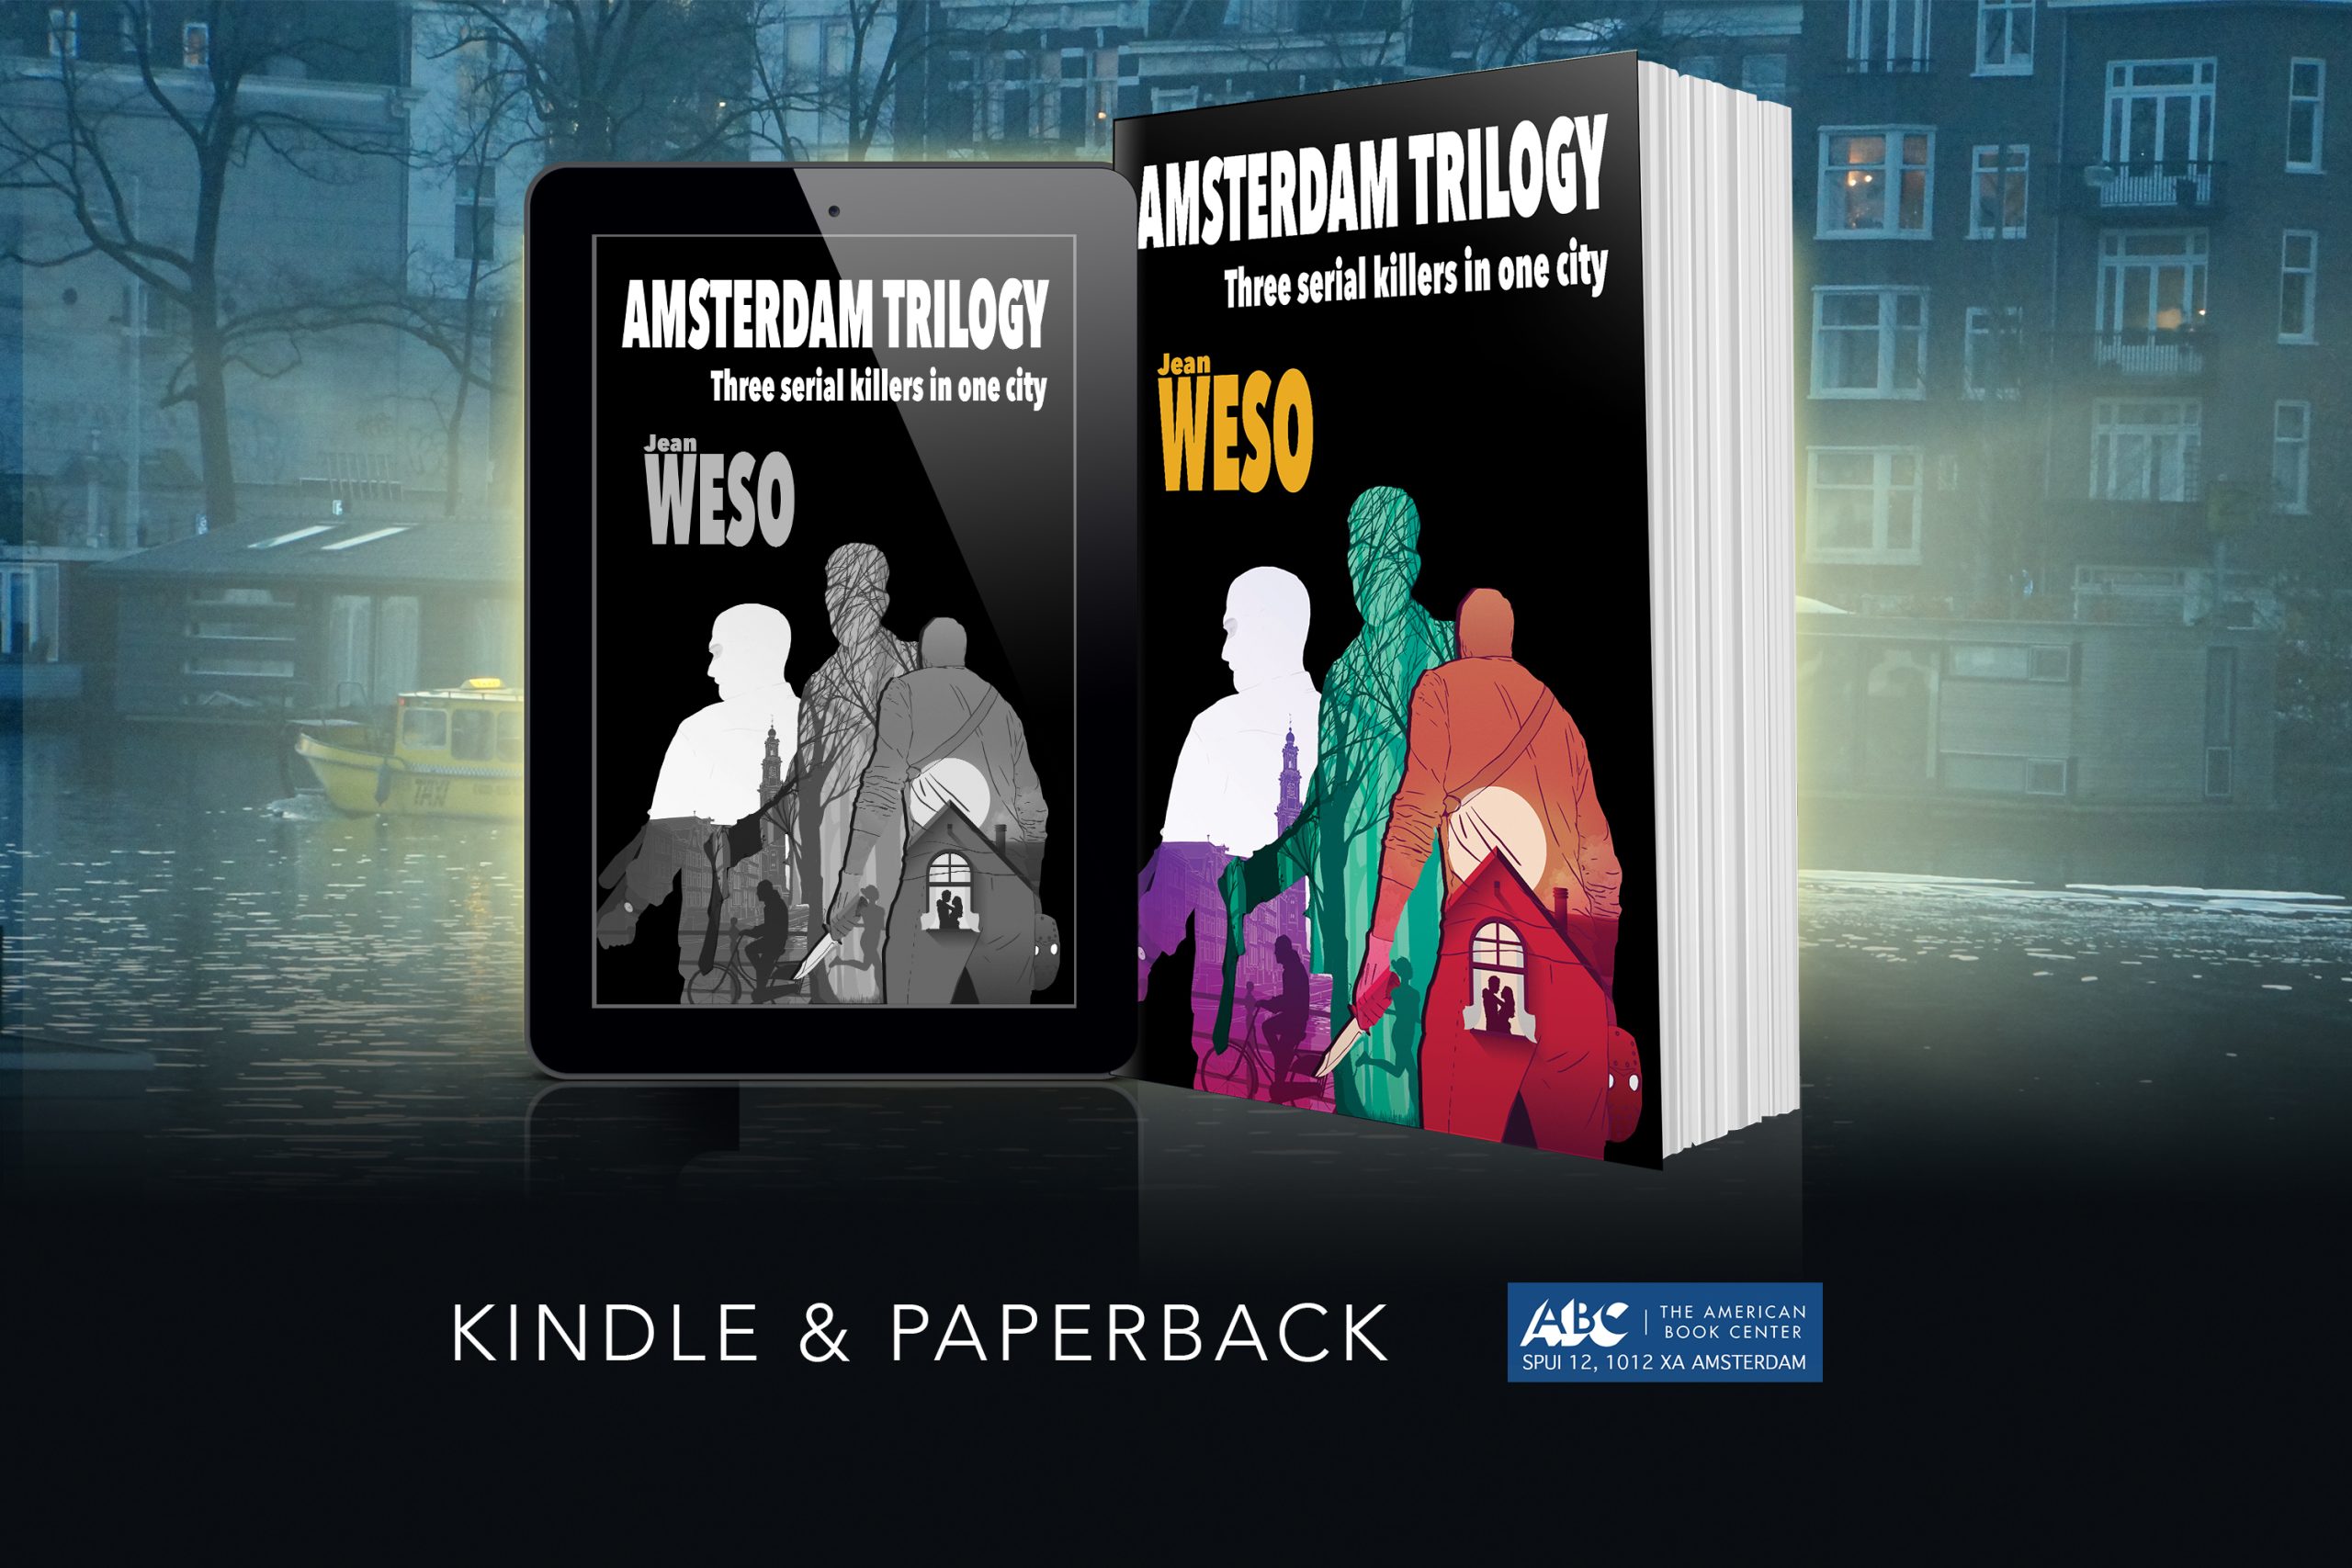 AMSTERDAM TRILOGY — get it today for only $ 2.99